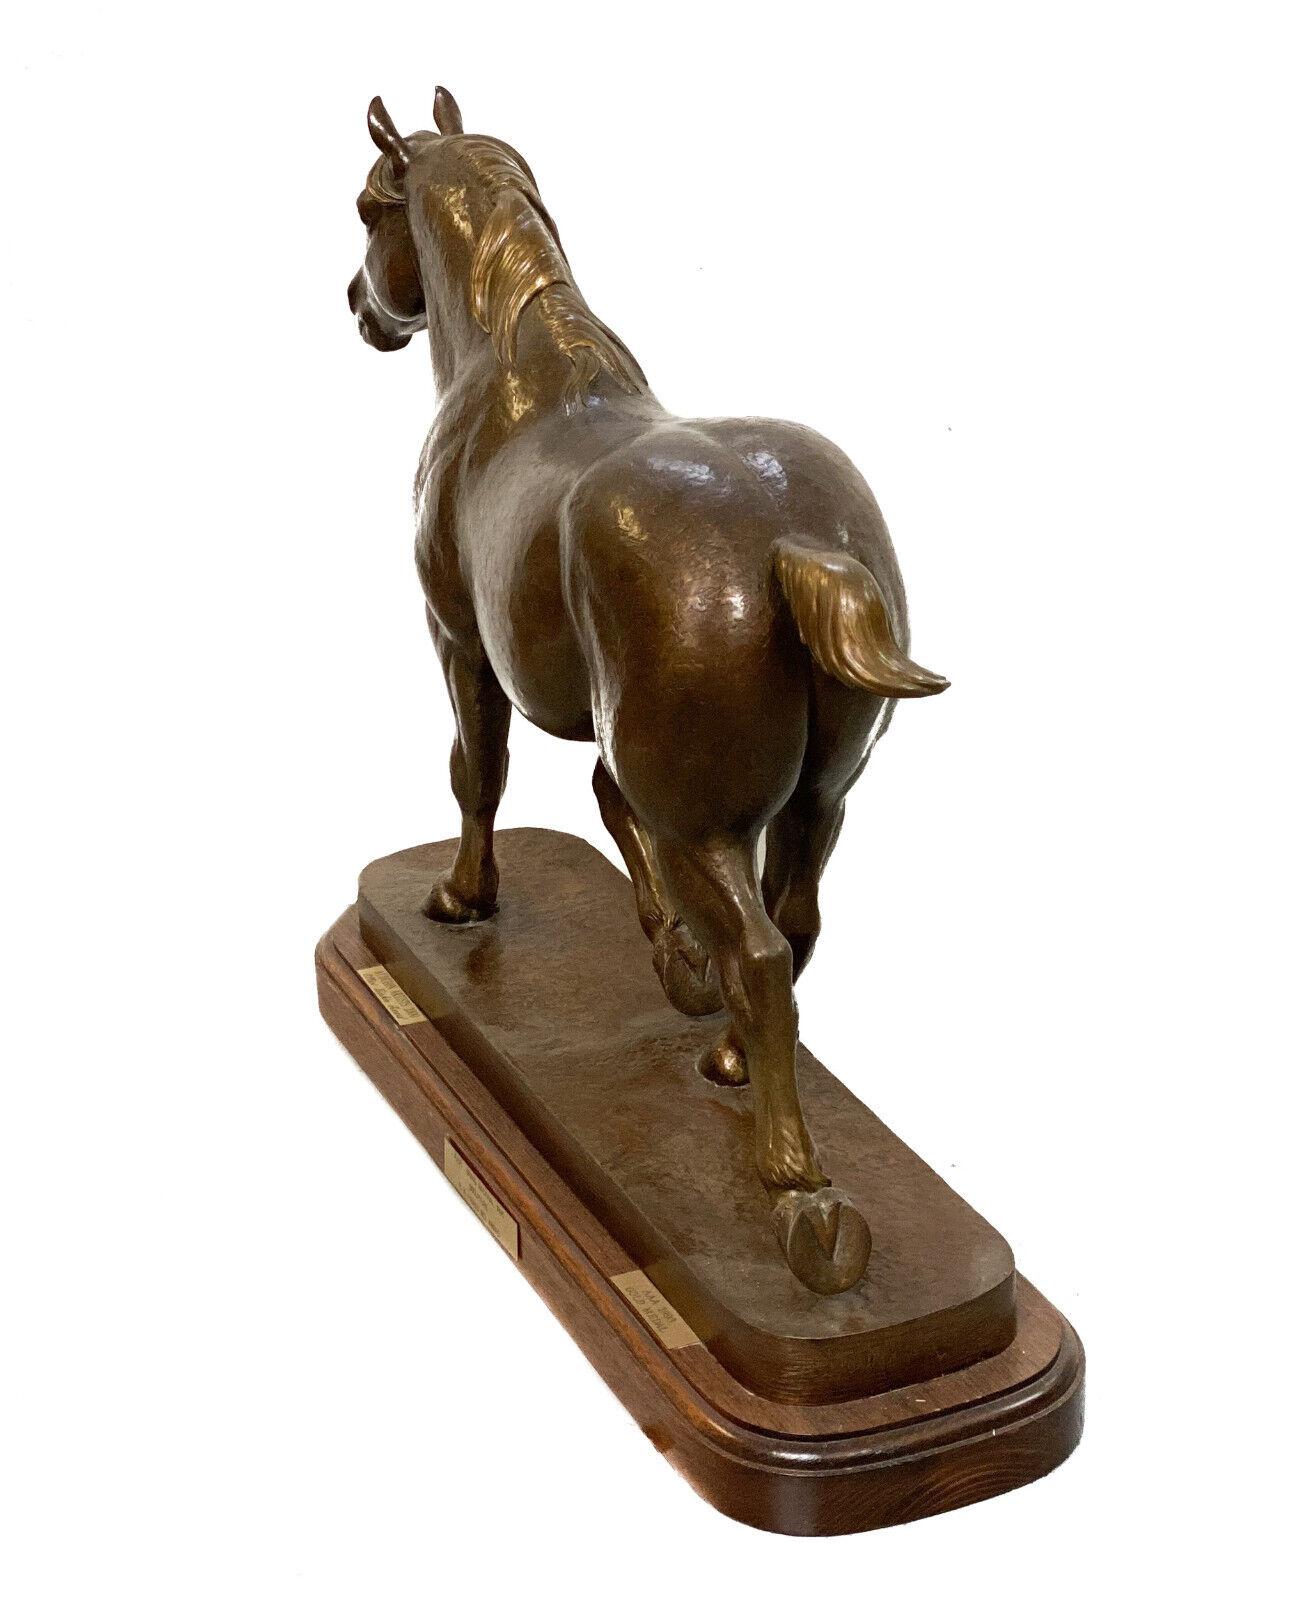 Marilyn Newmark Bronze Horse Sculpture, Herculean Limited Edition of 5, 1994 For Sale 1